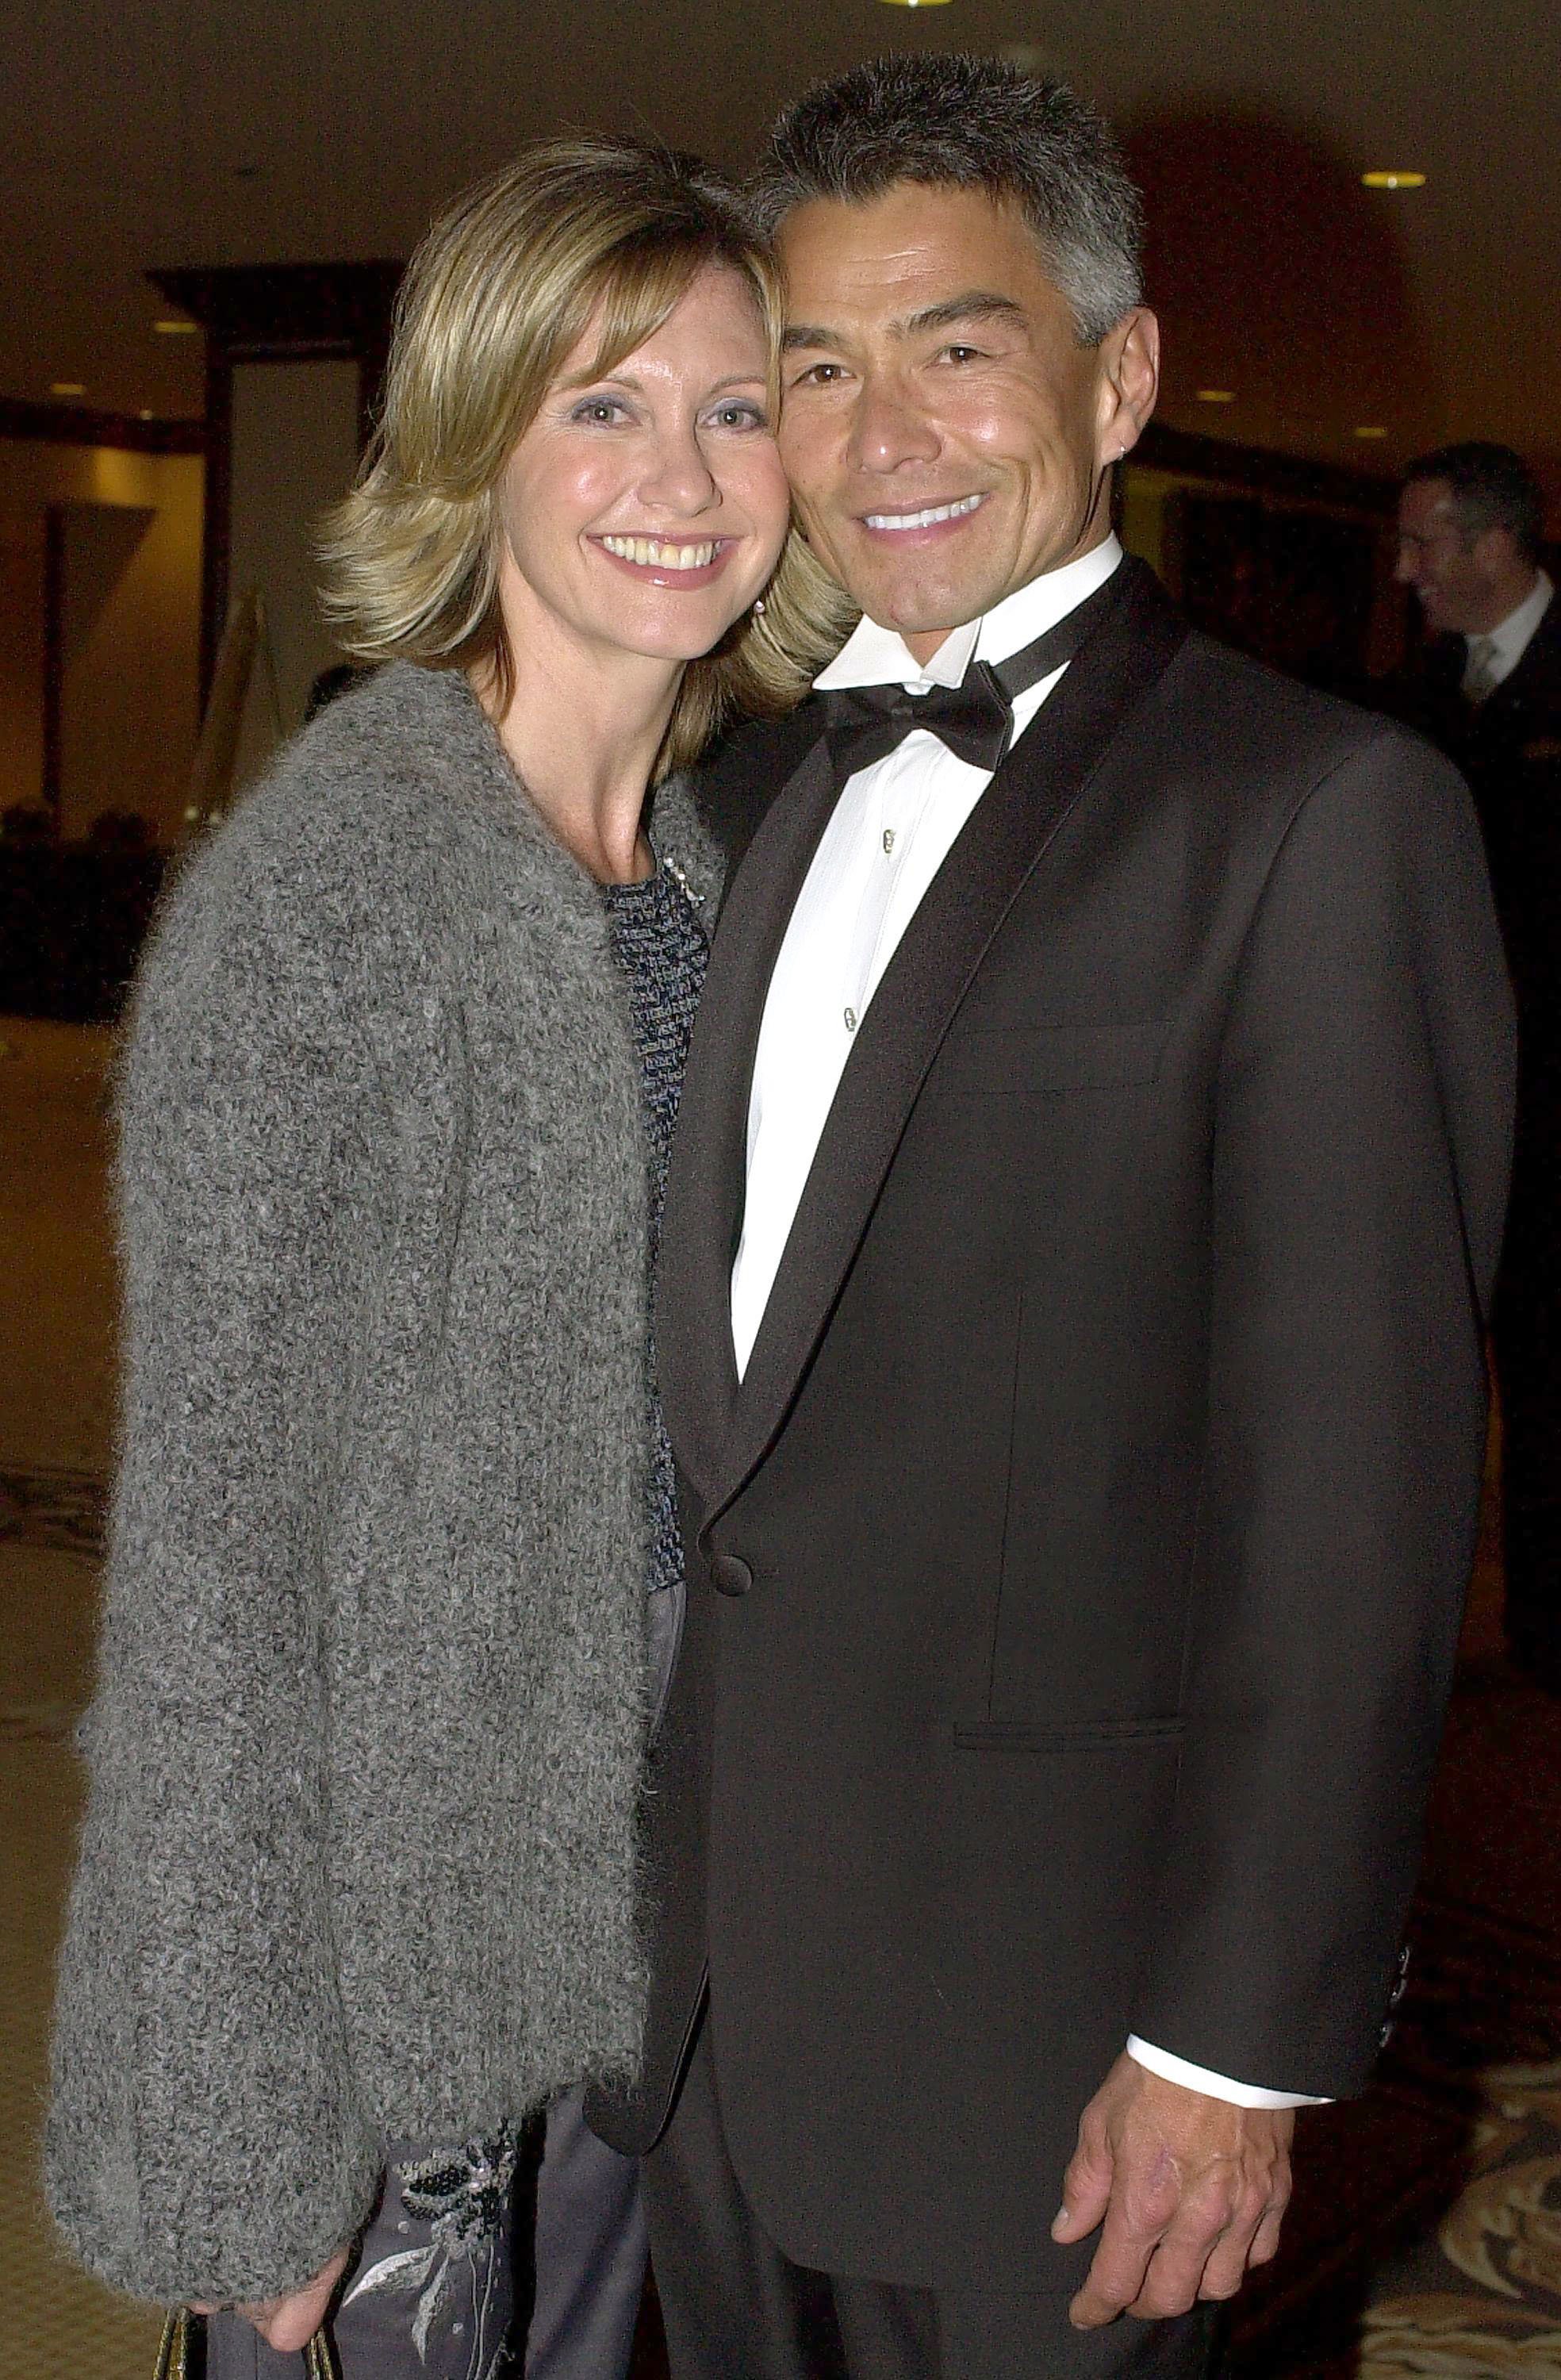 Actress Olivia Newton-John poses with her boyfriend Patrick McDermott at the 10th Annual Human Rights Campaign Gala, February 17, 2001 in Los Angeles | Source: Getty Images